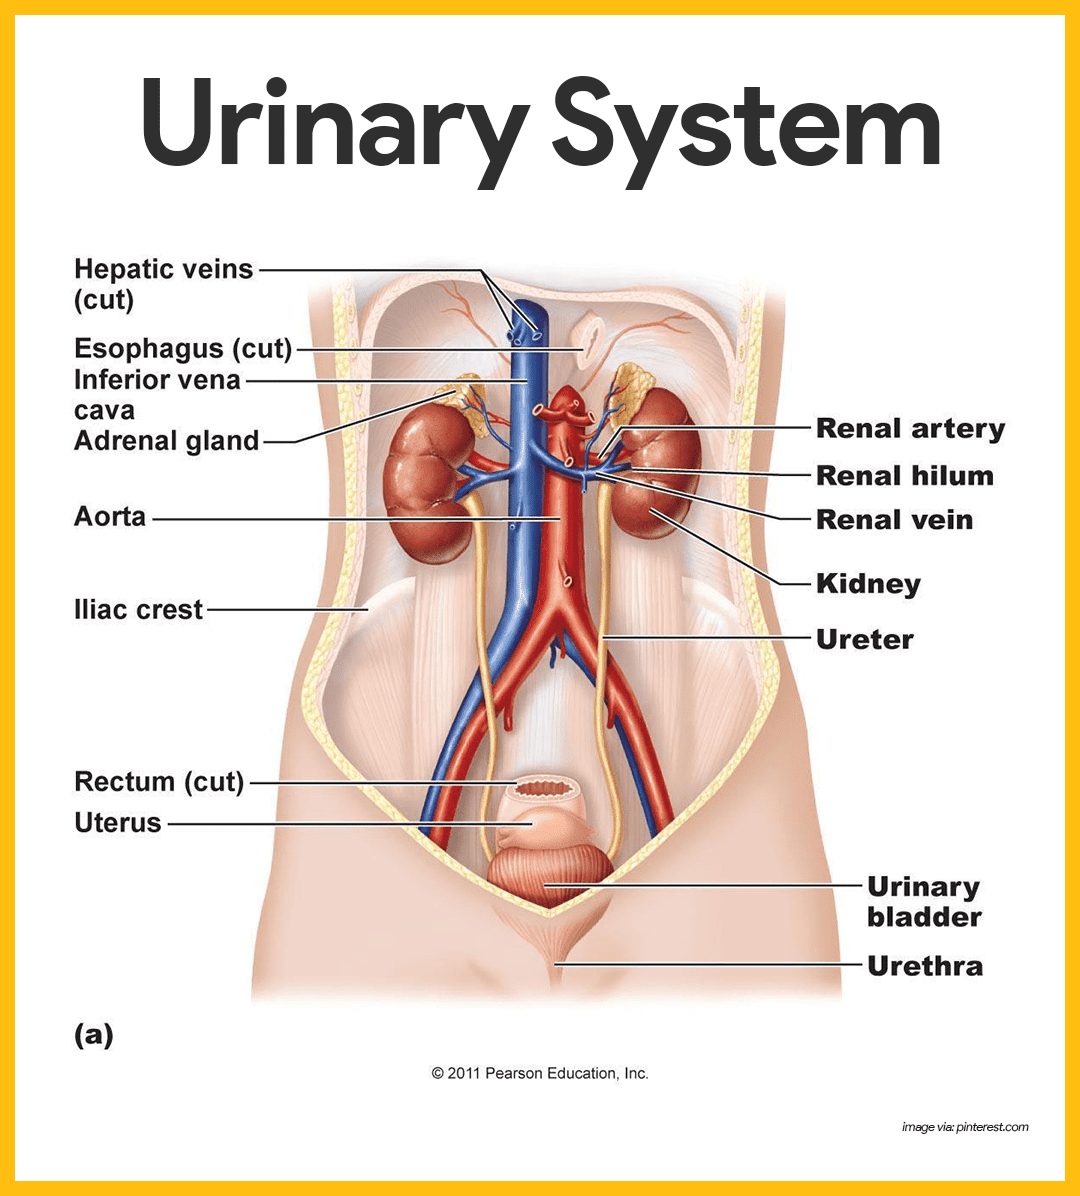 Urinary System Anatomy and Physiology: Study Guide for Nurses